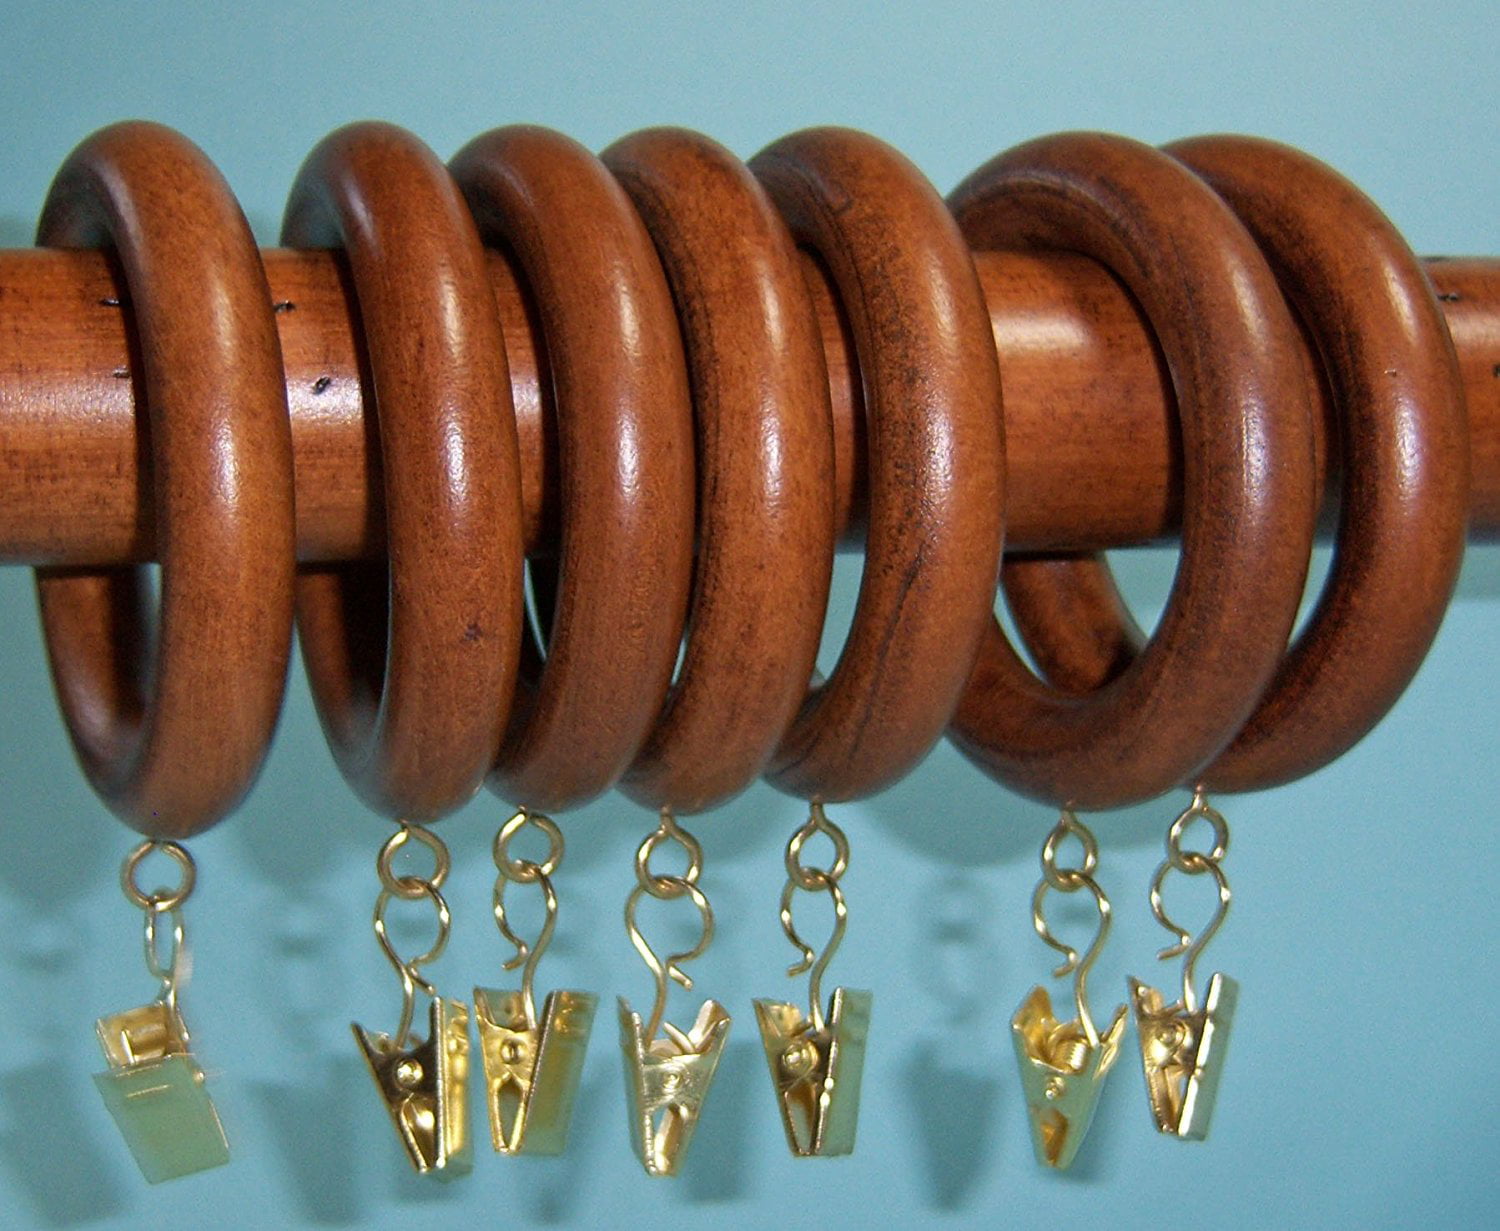 Boho Chic Brown Wood fits 1 3/4” rod. 13 Wooden Curtain Rings with Round Eye 